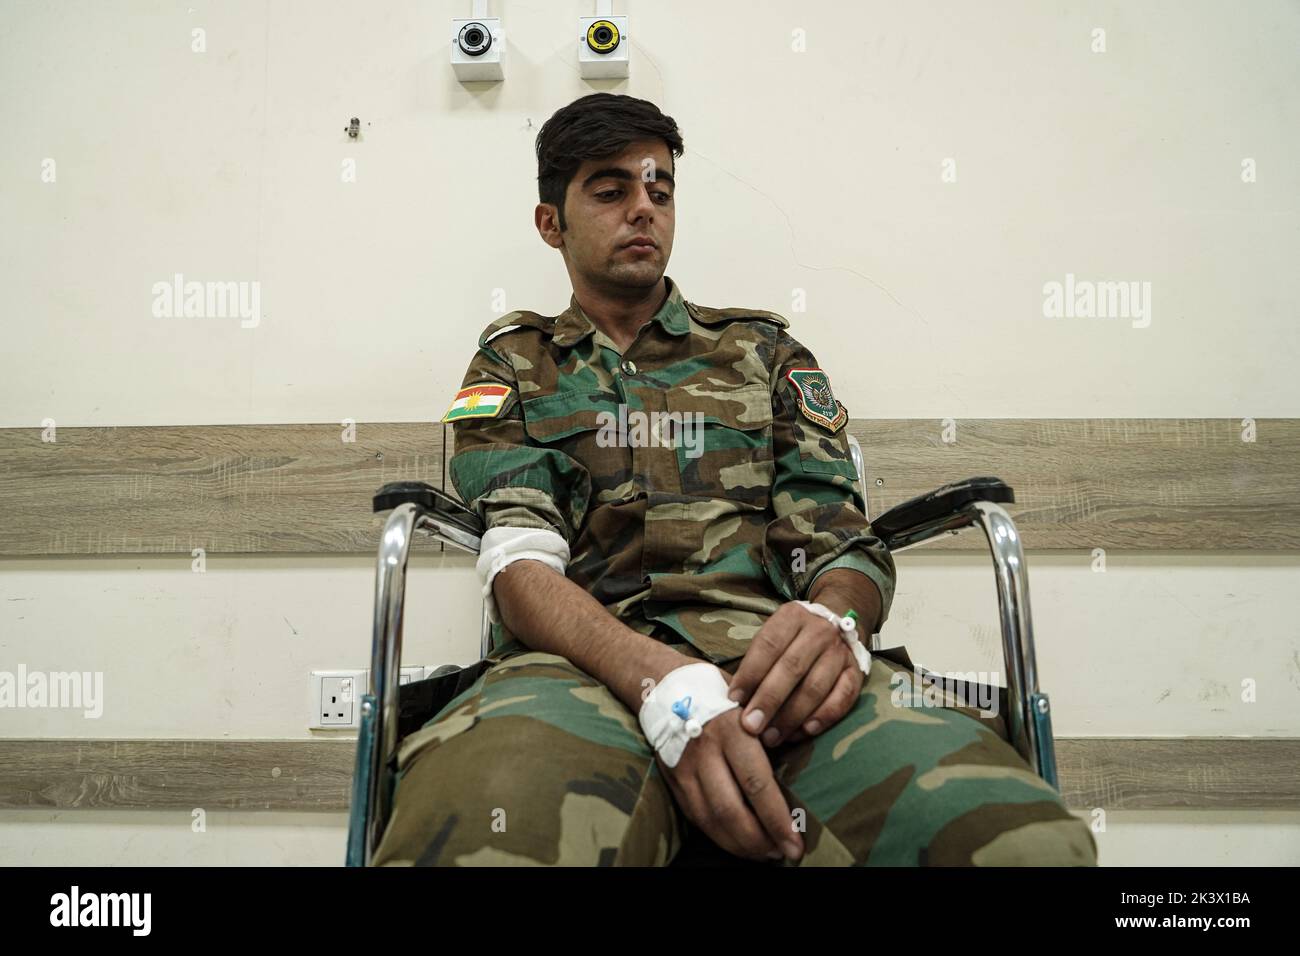 28 September 2022, Iraq, Erbil: A wounded member of the opposition Kurdistan Freedom Party (PAK) sits on a wheelchair at a hospital following attacks by Iranian explosives-laden drones and rockets targeting the opposition Kurdistan Freedom Party (PAK), the Kurdistan Democratic Party of Iran (KDPI), the Free Life Party of Kurdistan (PJAK), and Komala in the provinces of Erbil and Sulaymaniyah, Kurdish media reported. The death toll from the attacks on opposition groups in the autonomous region of Kurdistan rose to nine and at least 32 were also injured, Iraq's state news agency INA quoted Barzi Stock Photo